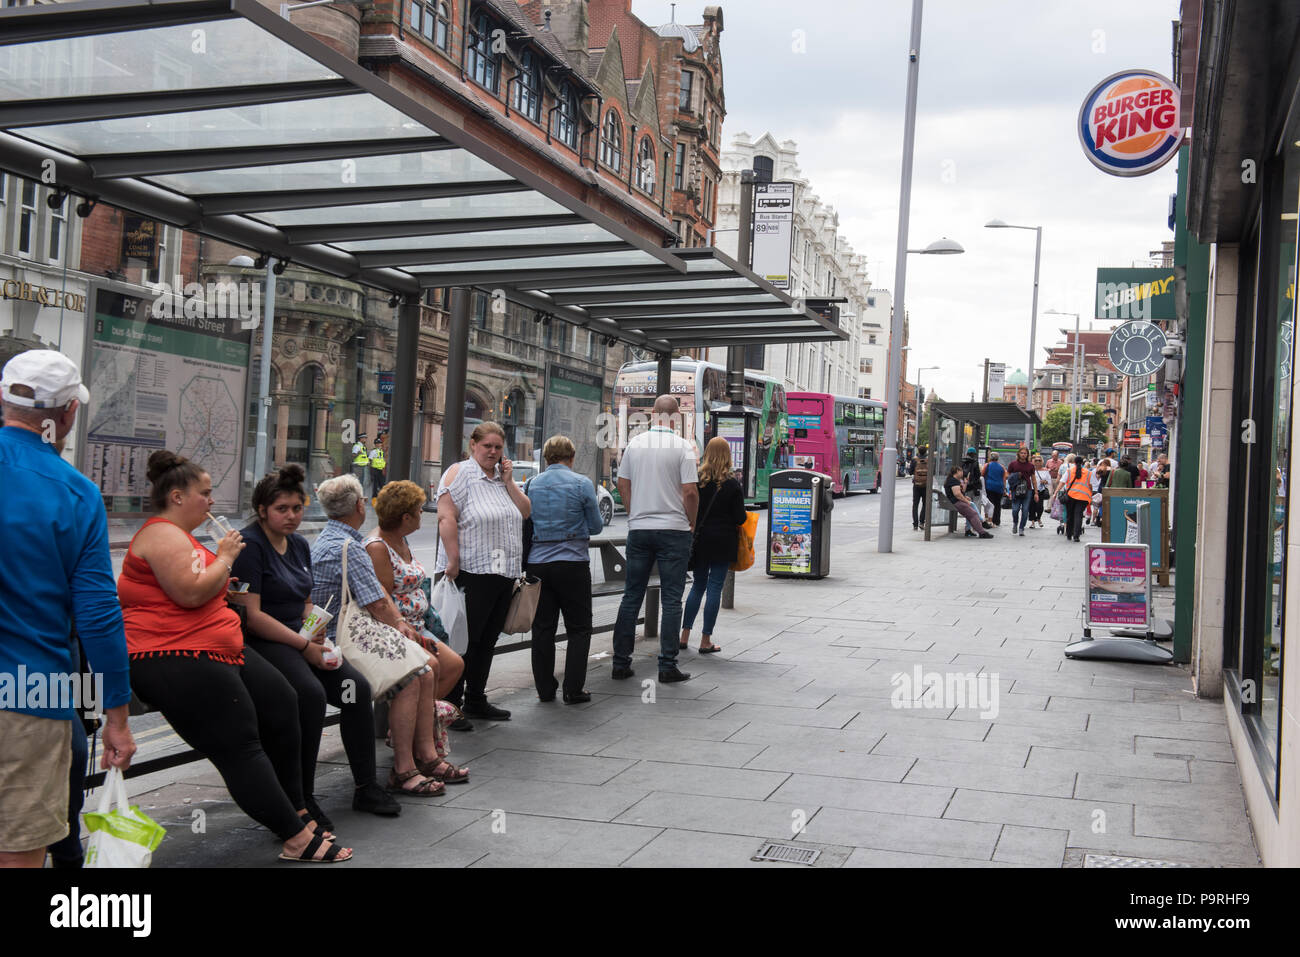 People waiting at a bus stop on Upper Parliament Street in Nottingham City, Nottinghamshire England UK Stock Photo